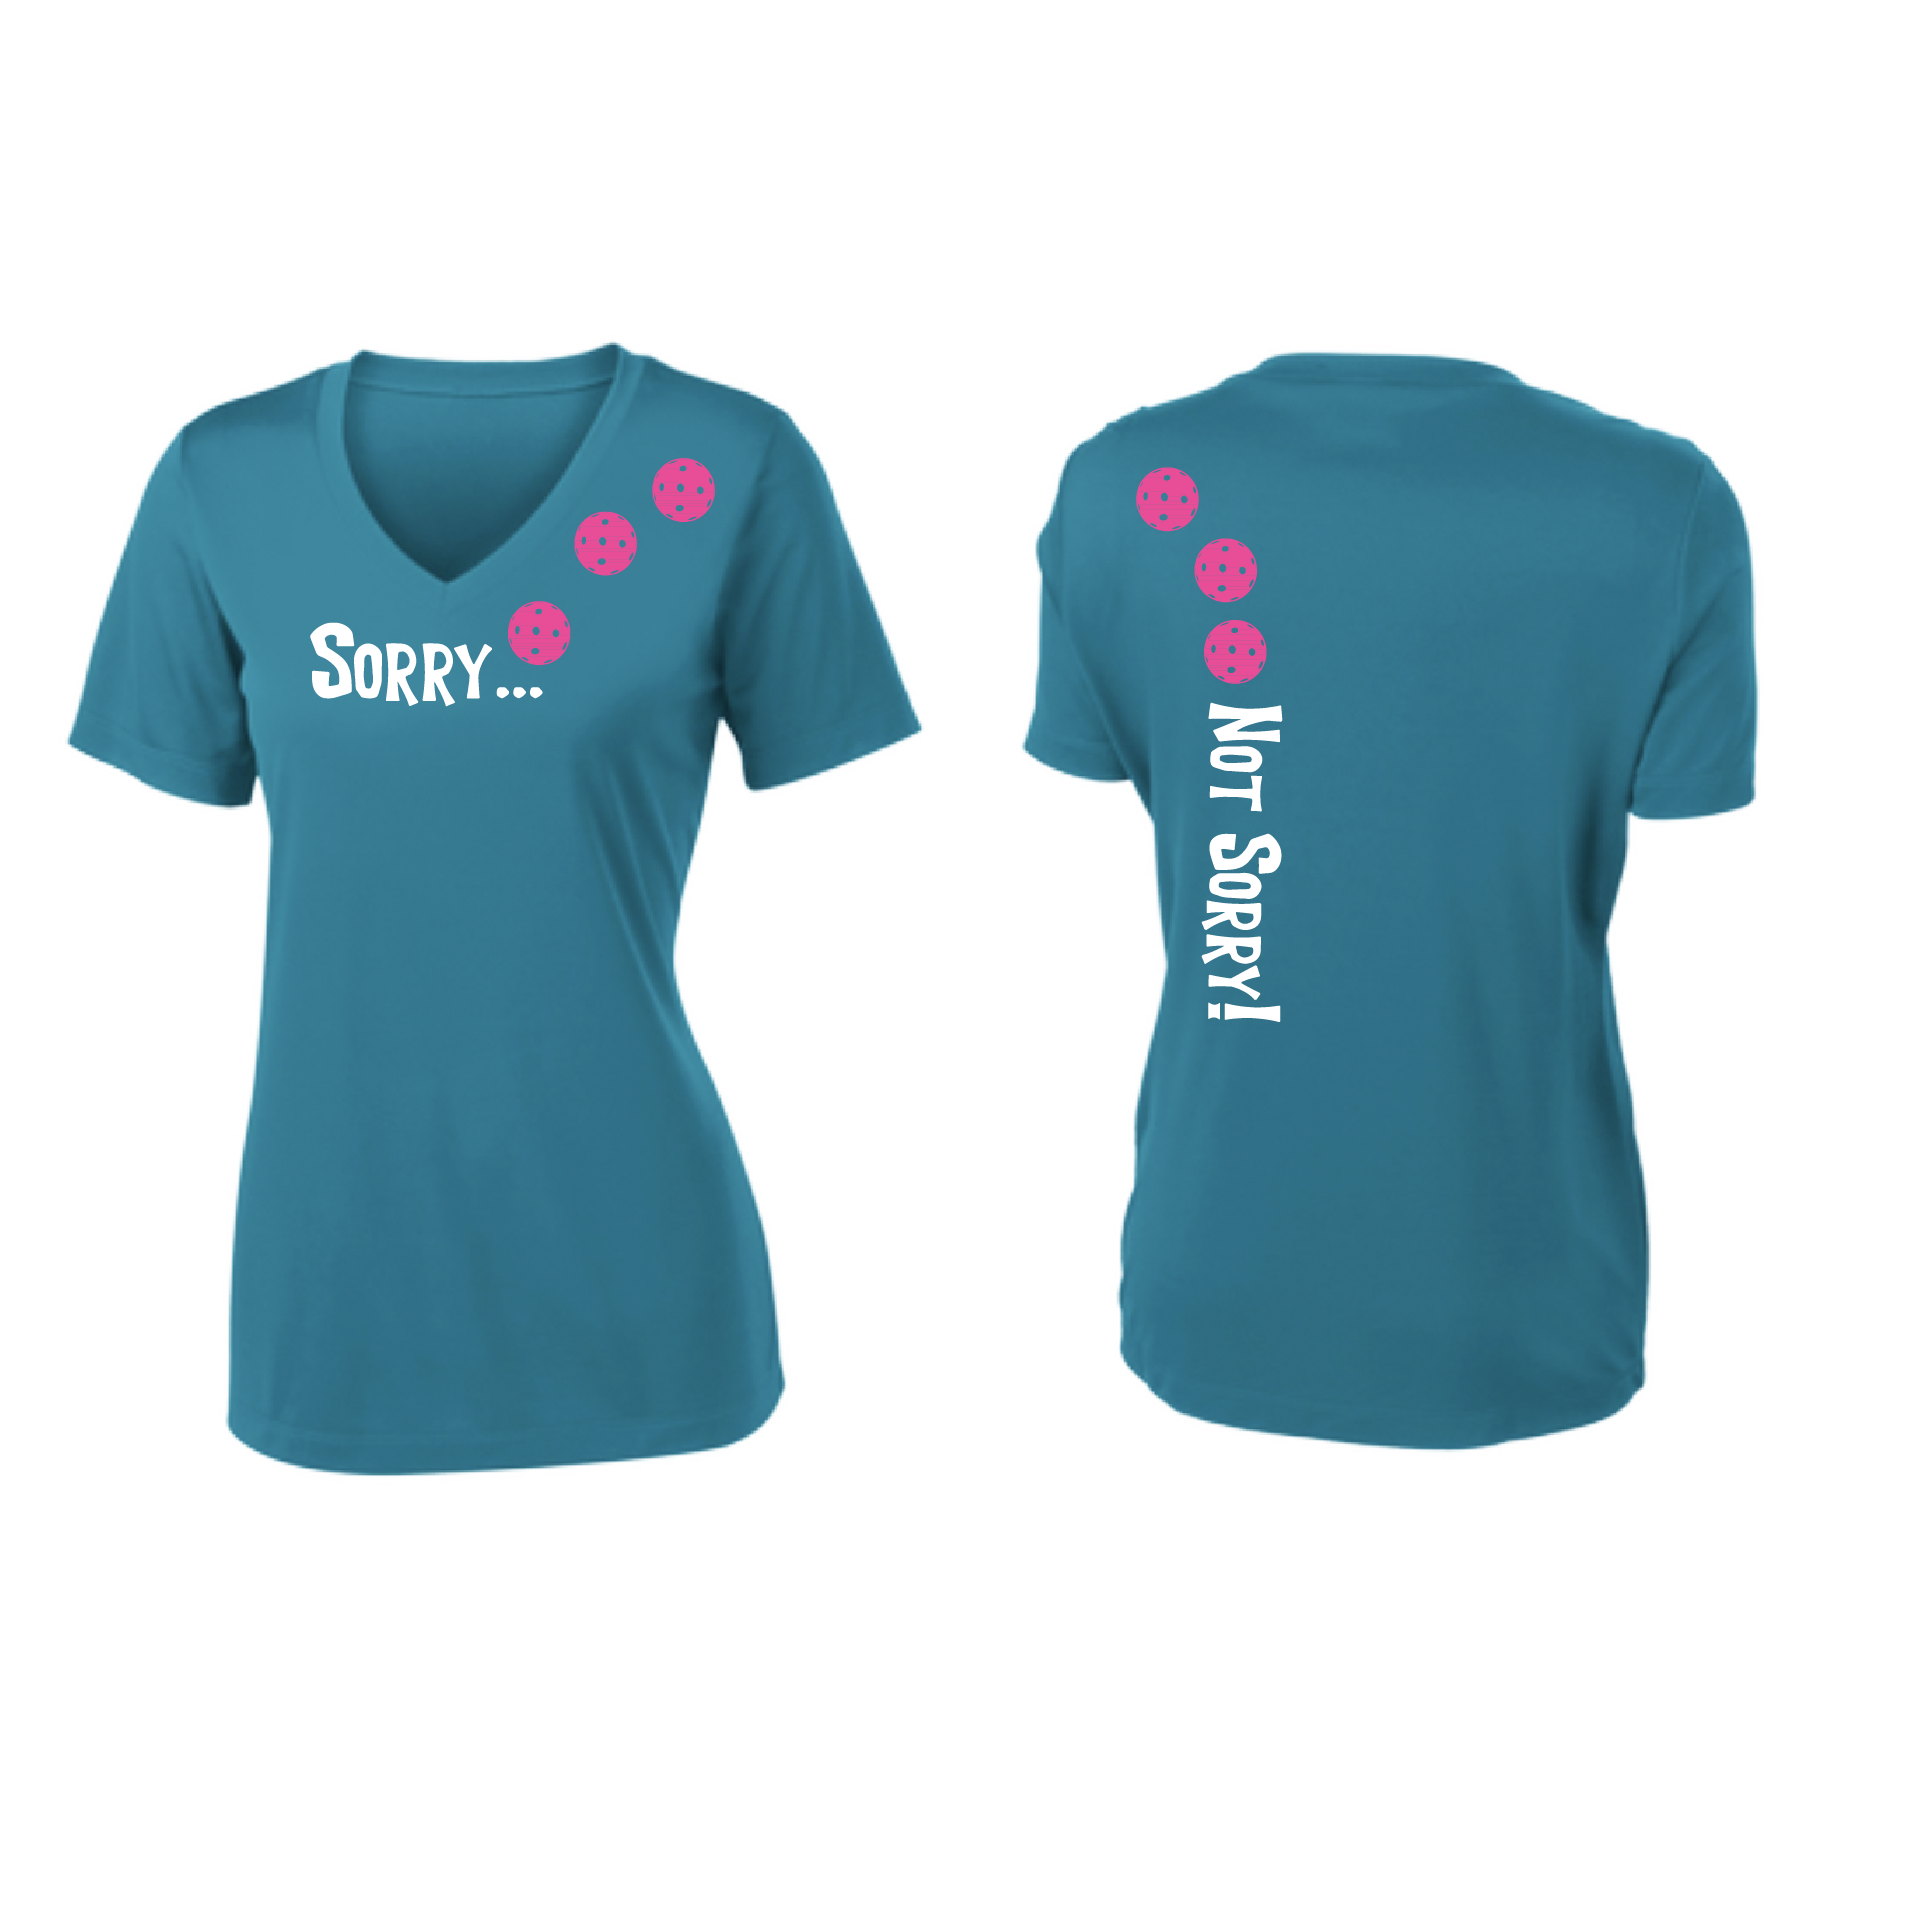 Pickleball Design: Sorry...Not Sorry with Customizable Ball Color – White, Green, Yellow or Pink Balls. .   Women's Styles: Short-Sleeve V-Neck Turn up the volume in this Women's shirt with its perfect mix of softness and attitude. Material is ultra-comfortable with moisture wicking properties and tri-blend softness. PosiCharge technology locks in color. Highly breathable and lightweight.